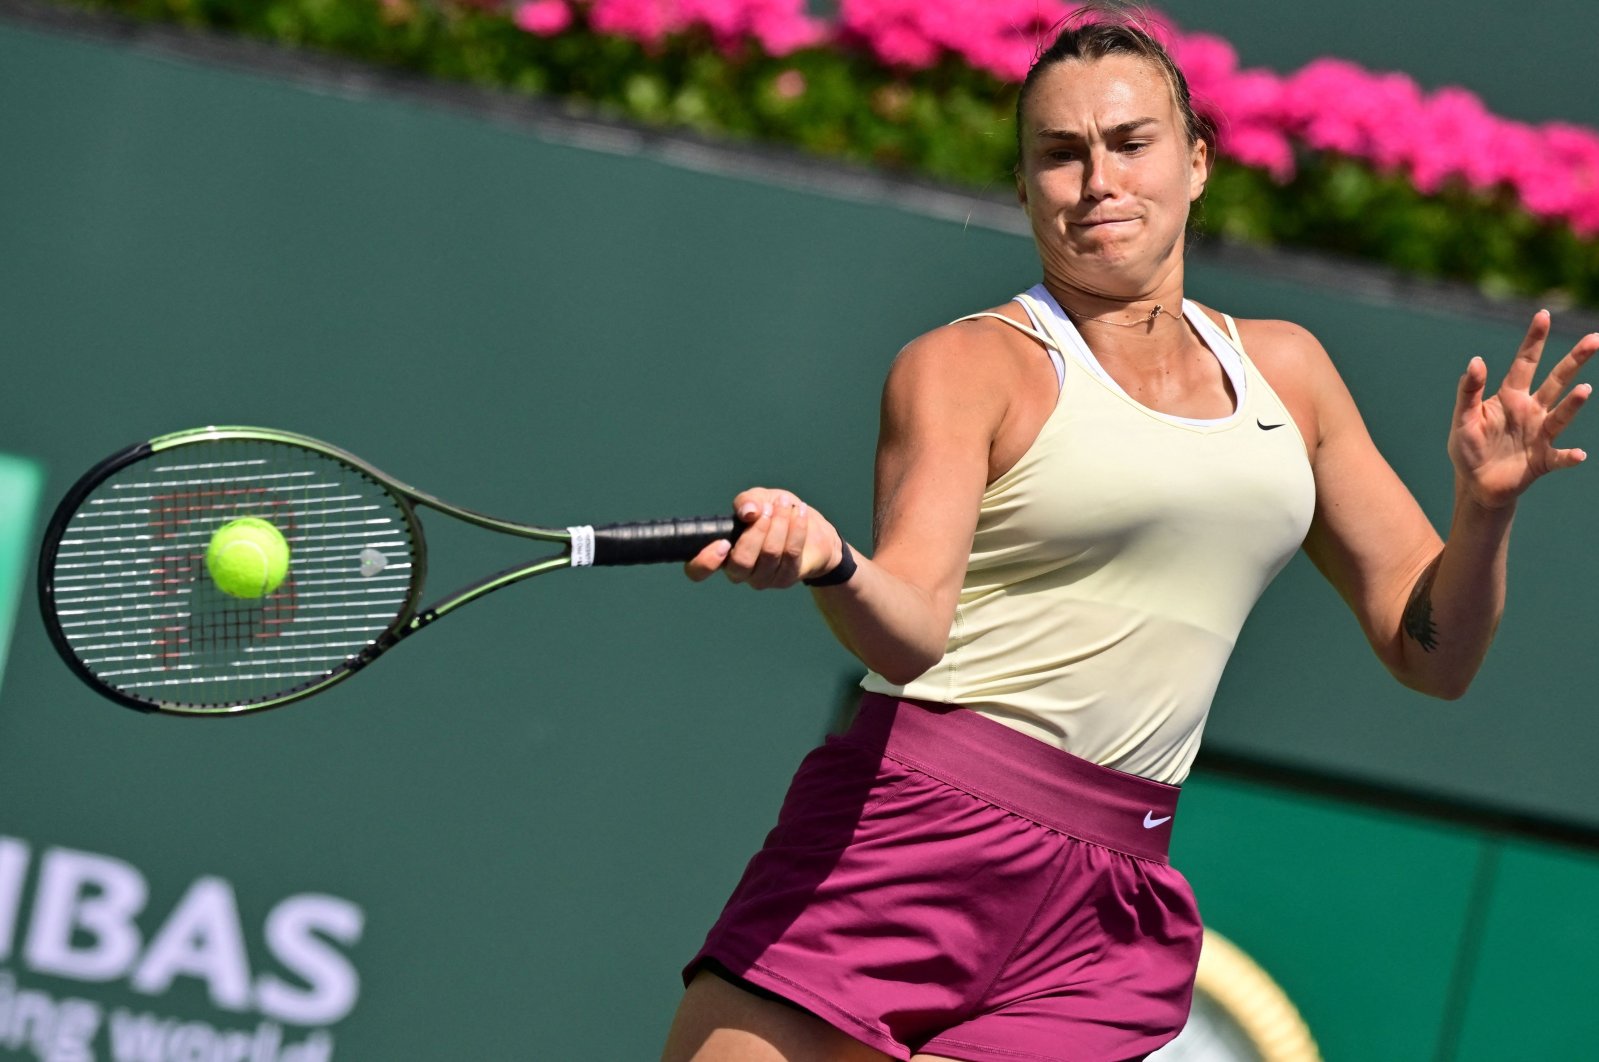 Belarusian Aryna Sabalenka hits a forehand return to Coco Gauff of the US in their quarterfinal tennis match at the 2023 WTA Indian Wells Open, Indian Wells, California, US., March 15, 2023. (AFP Photo)